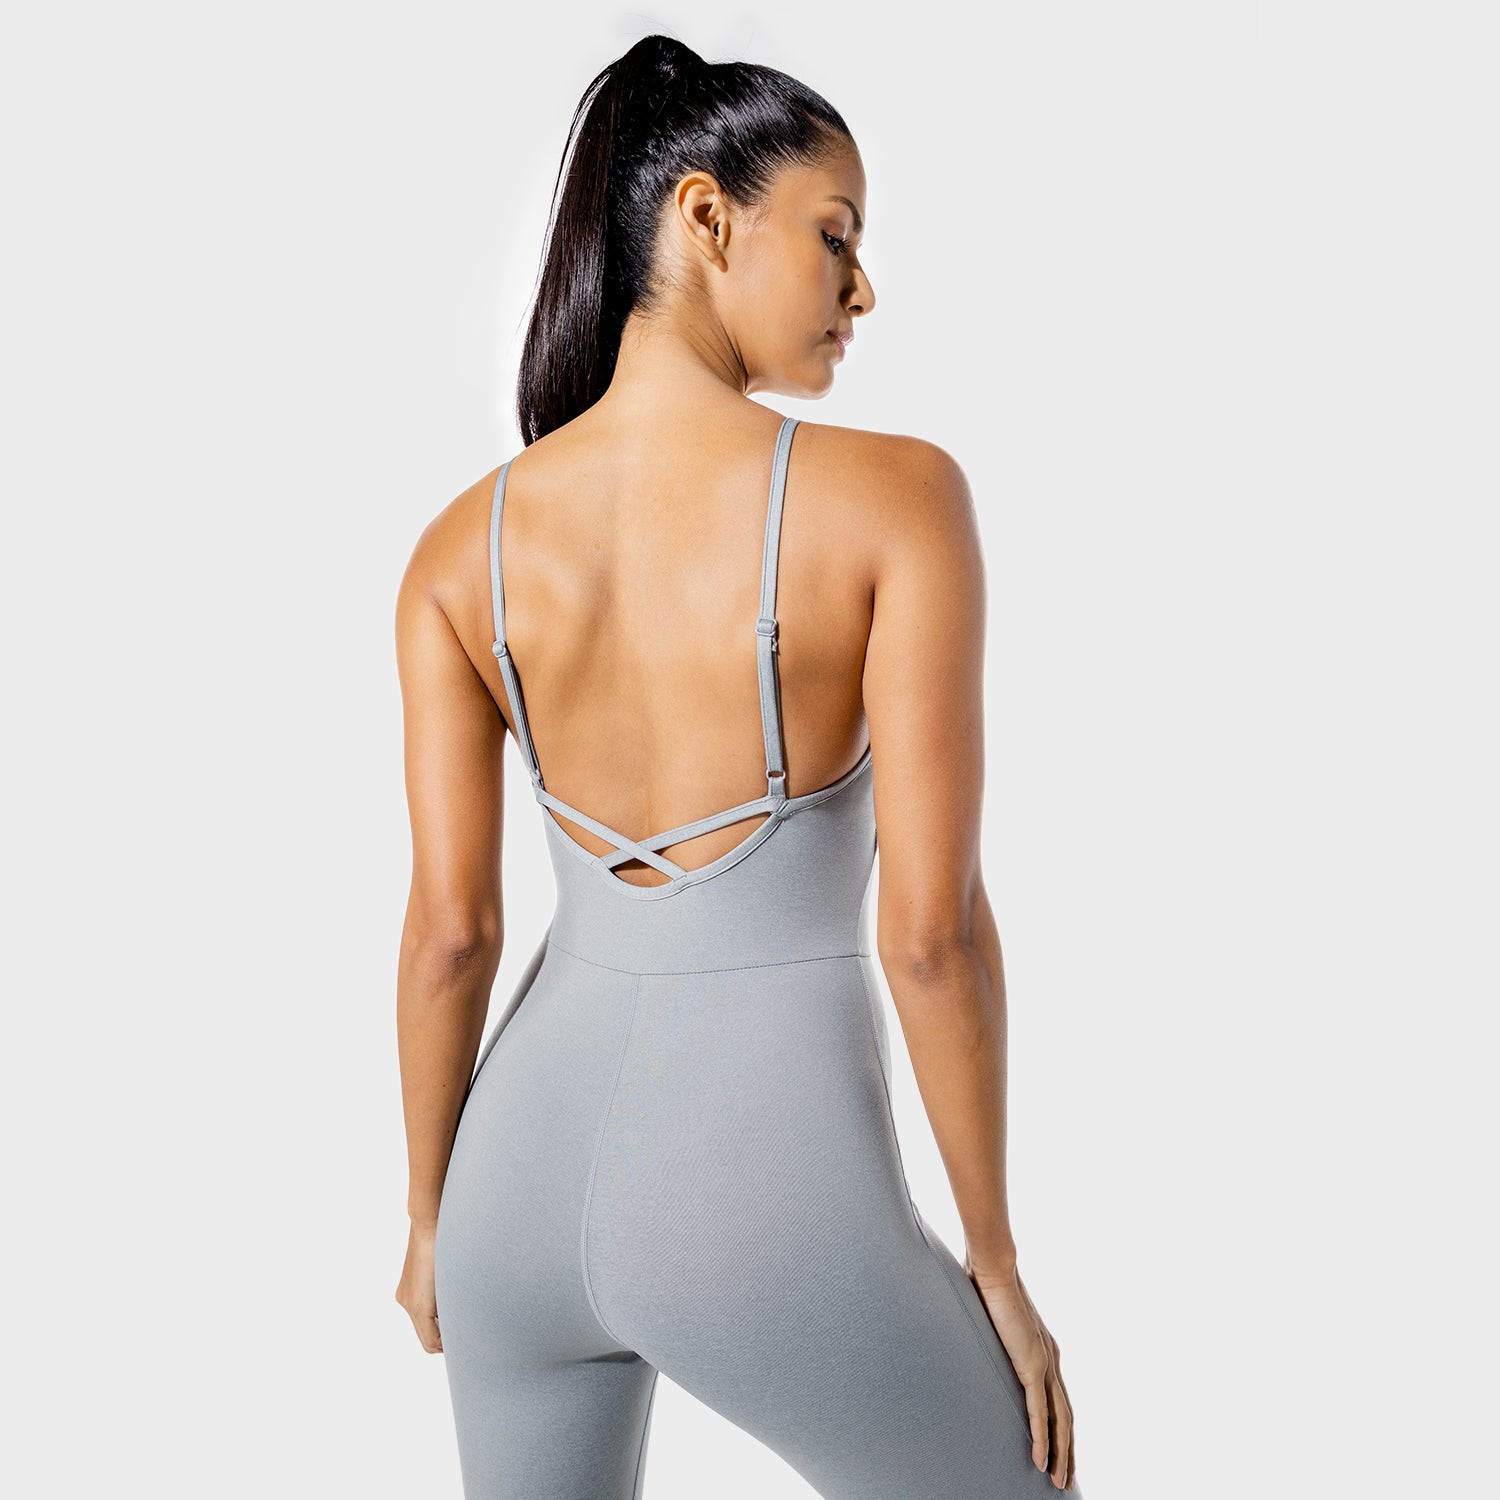 squatwolf-gym-wear-womens-fitness-performance-catsuit-grey-workout-tops